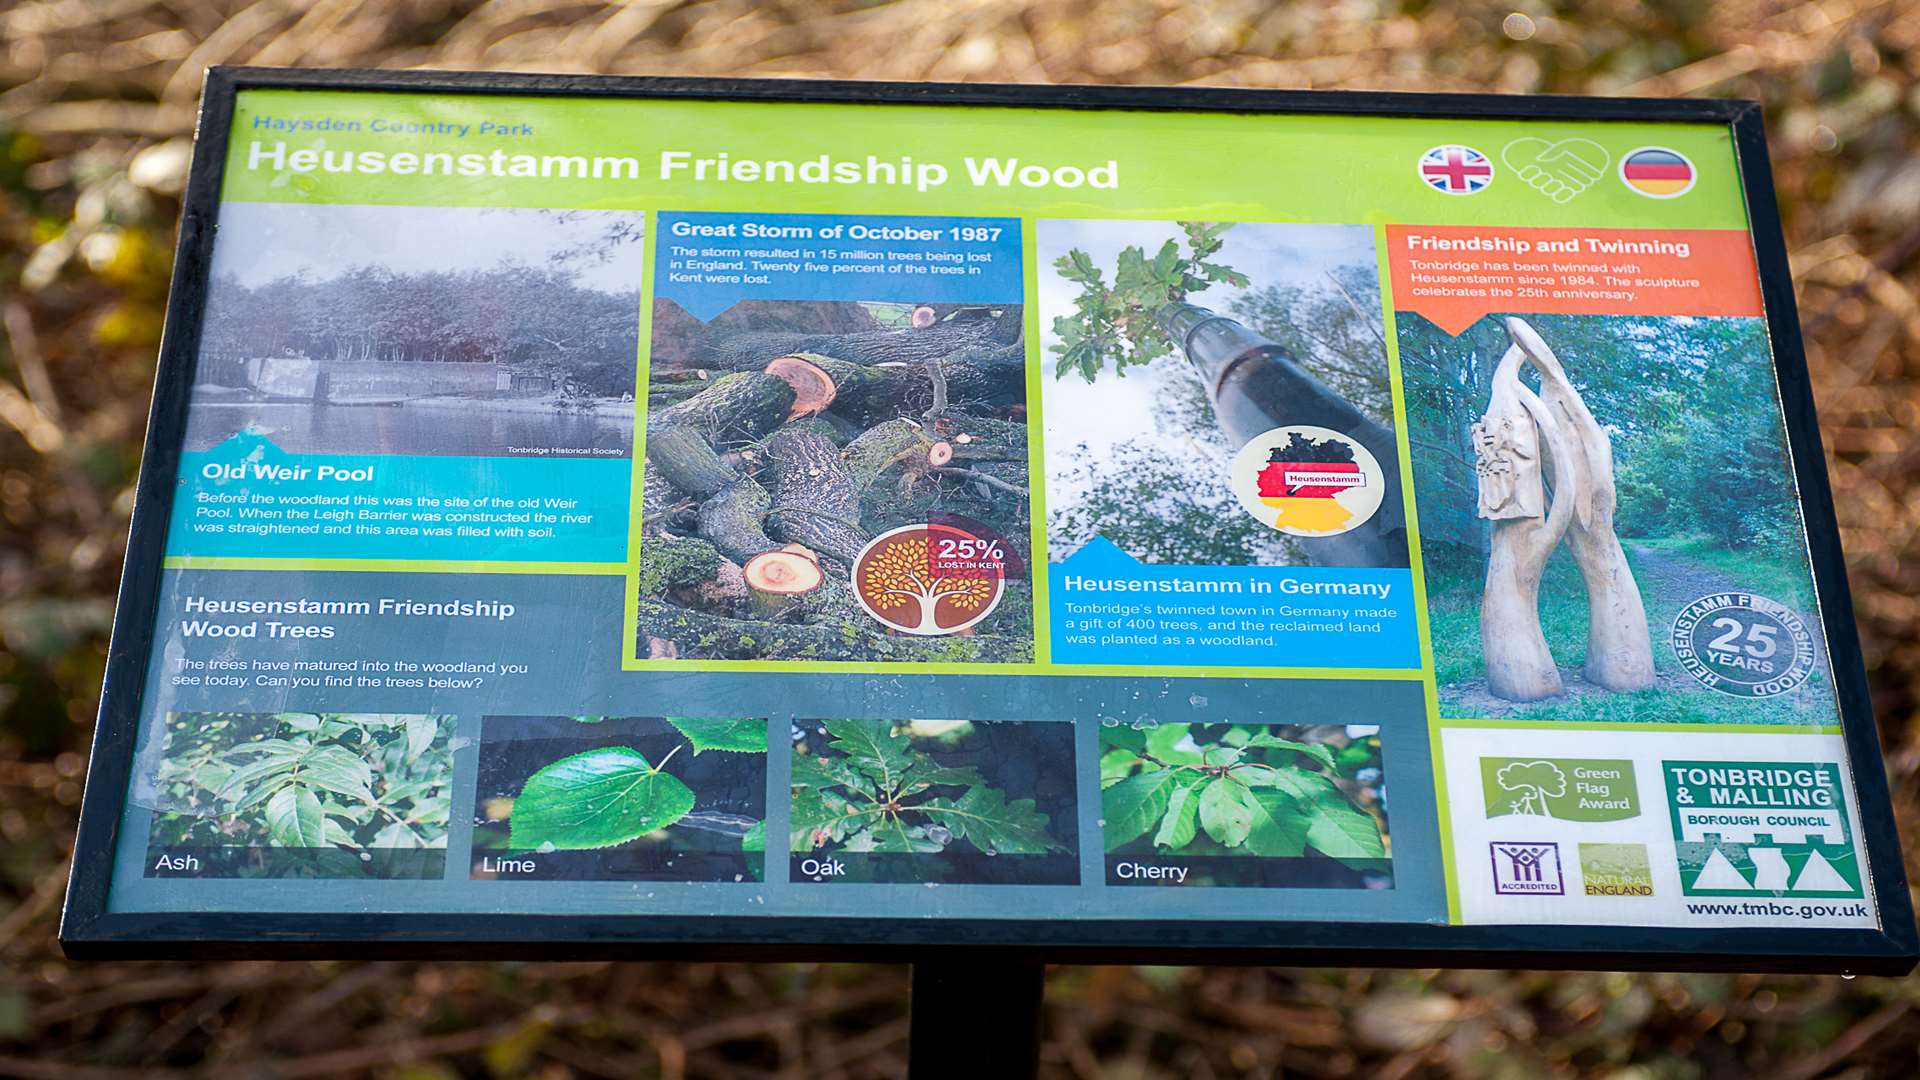 The Heusenstamm Friendship Wood's newly installed information sign